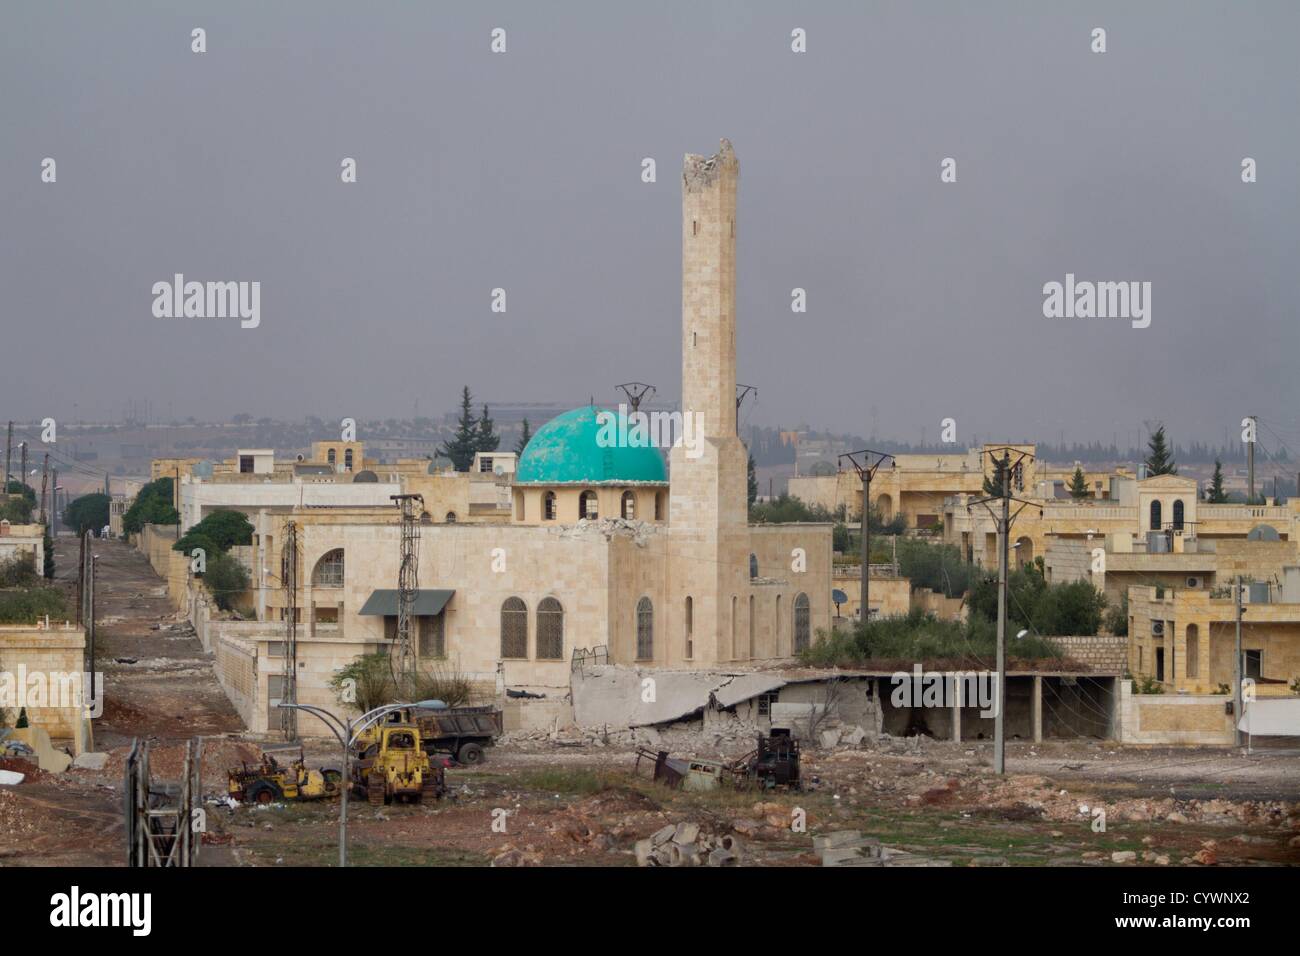 November 9, 2012 - Layramoon, Syria:  A view of a destroyed mosque near the government frontline stronghold. Stock Photo